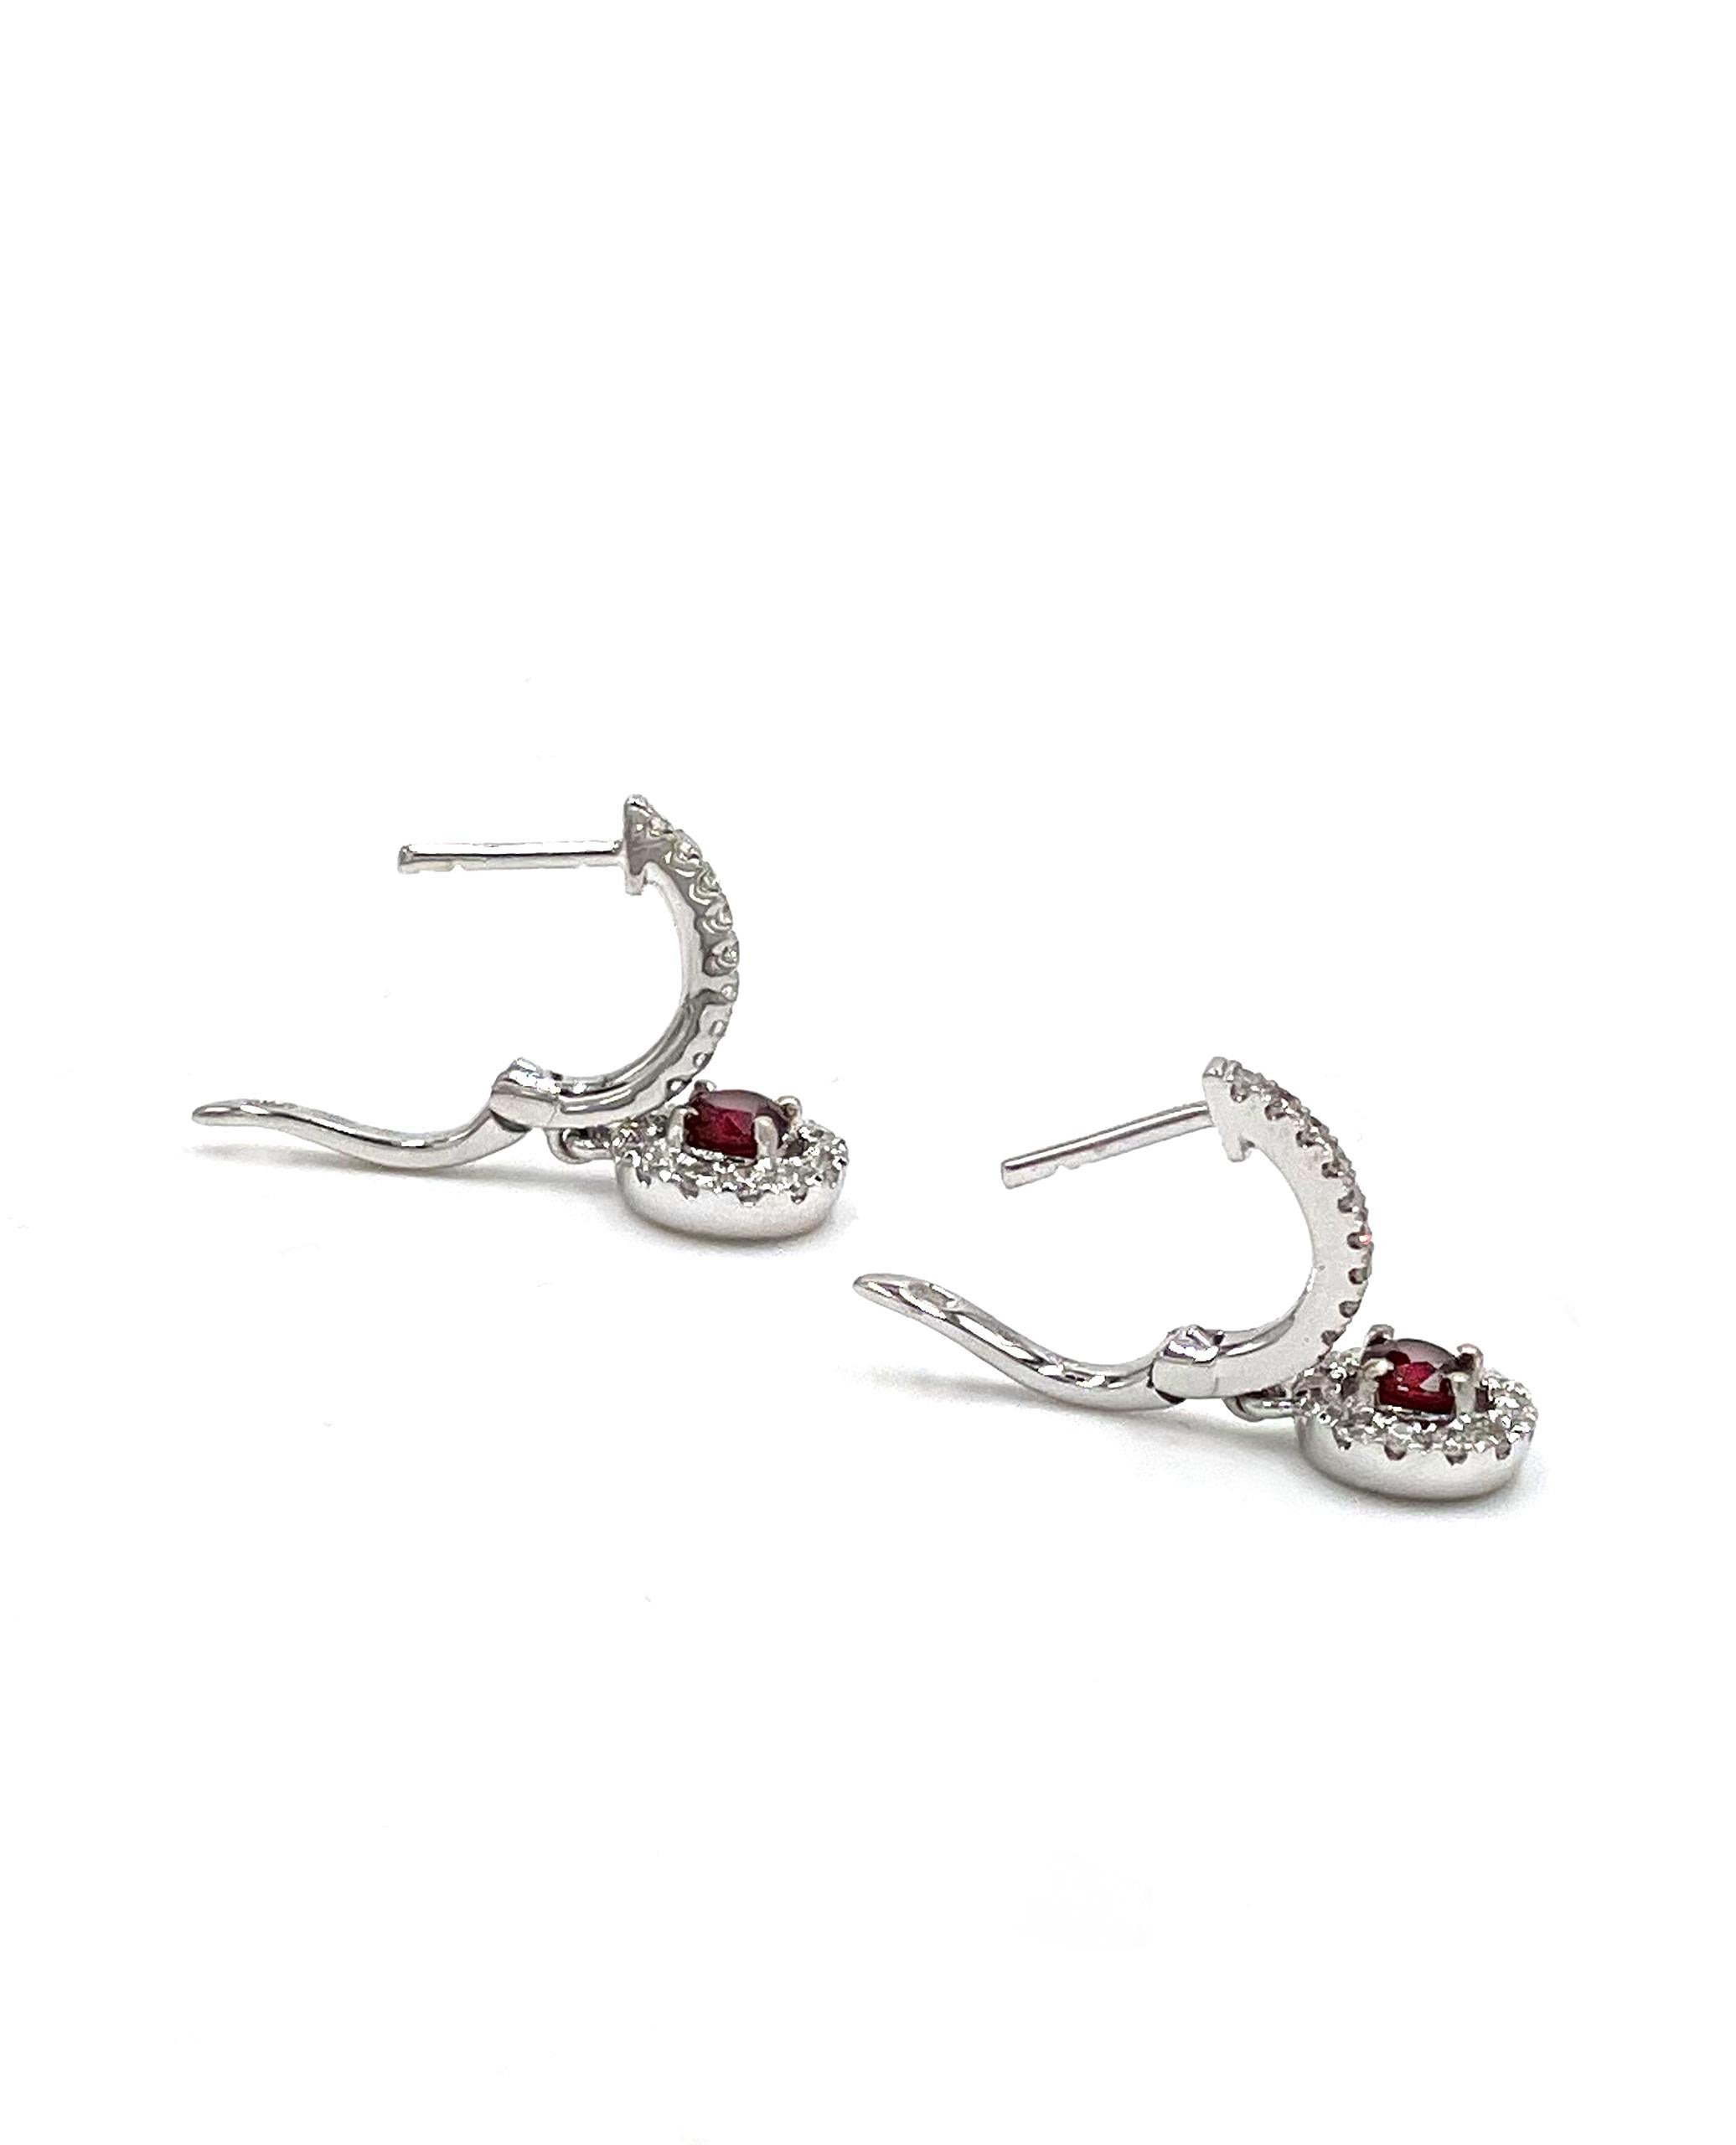 Pair of 18K white gold huggie hoop earrings with hanging halo ruby drops. The earrings are furnished with 44 round diamonds 0.40 carats and two round faceted rubies 0.44 carats.